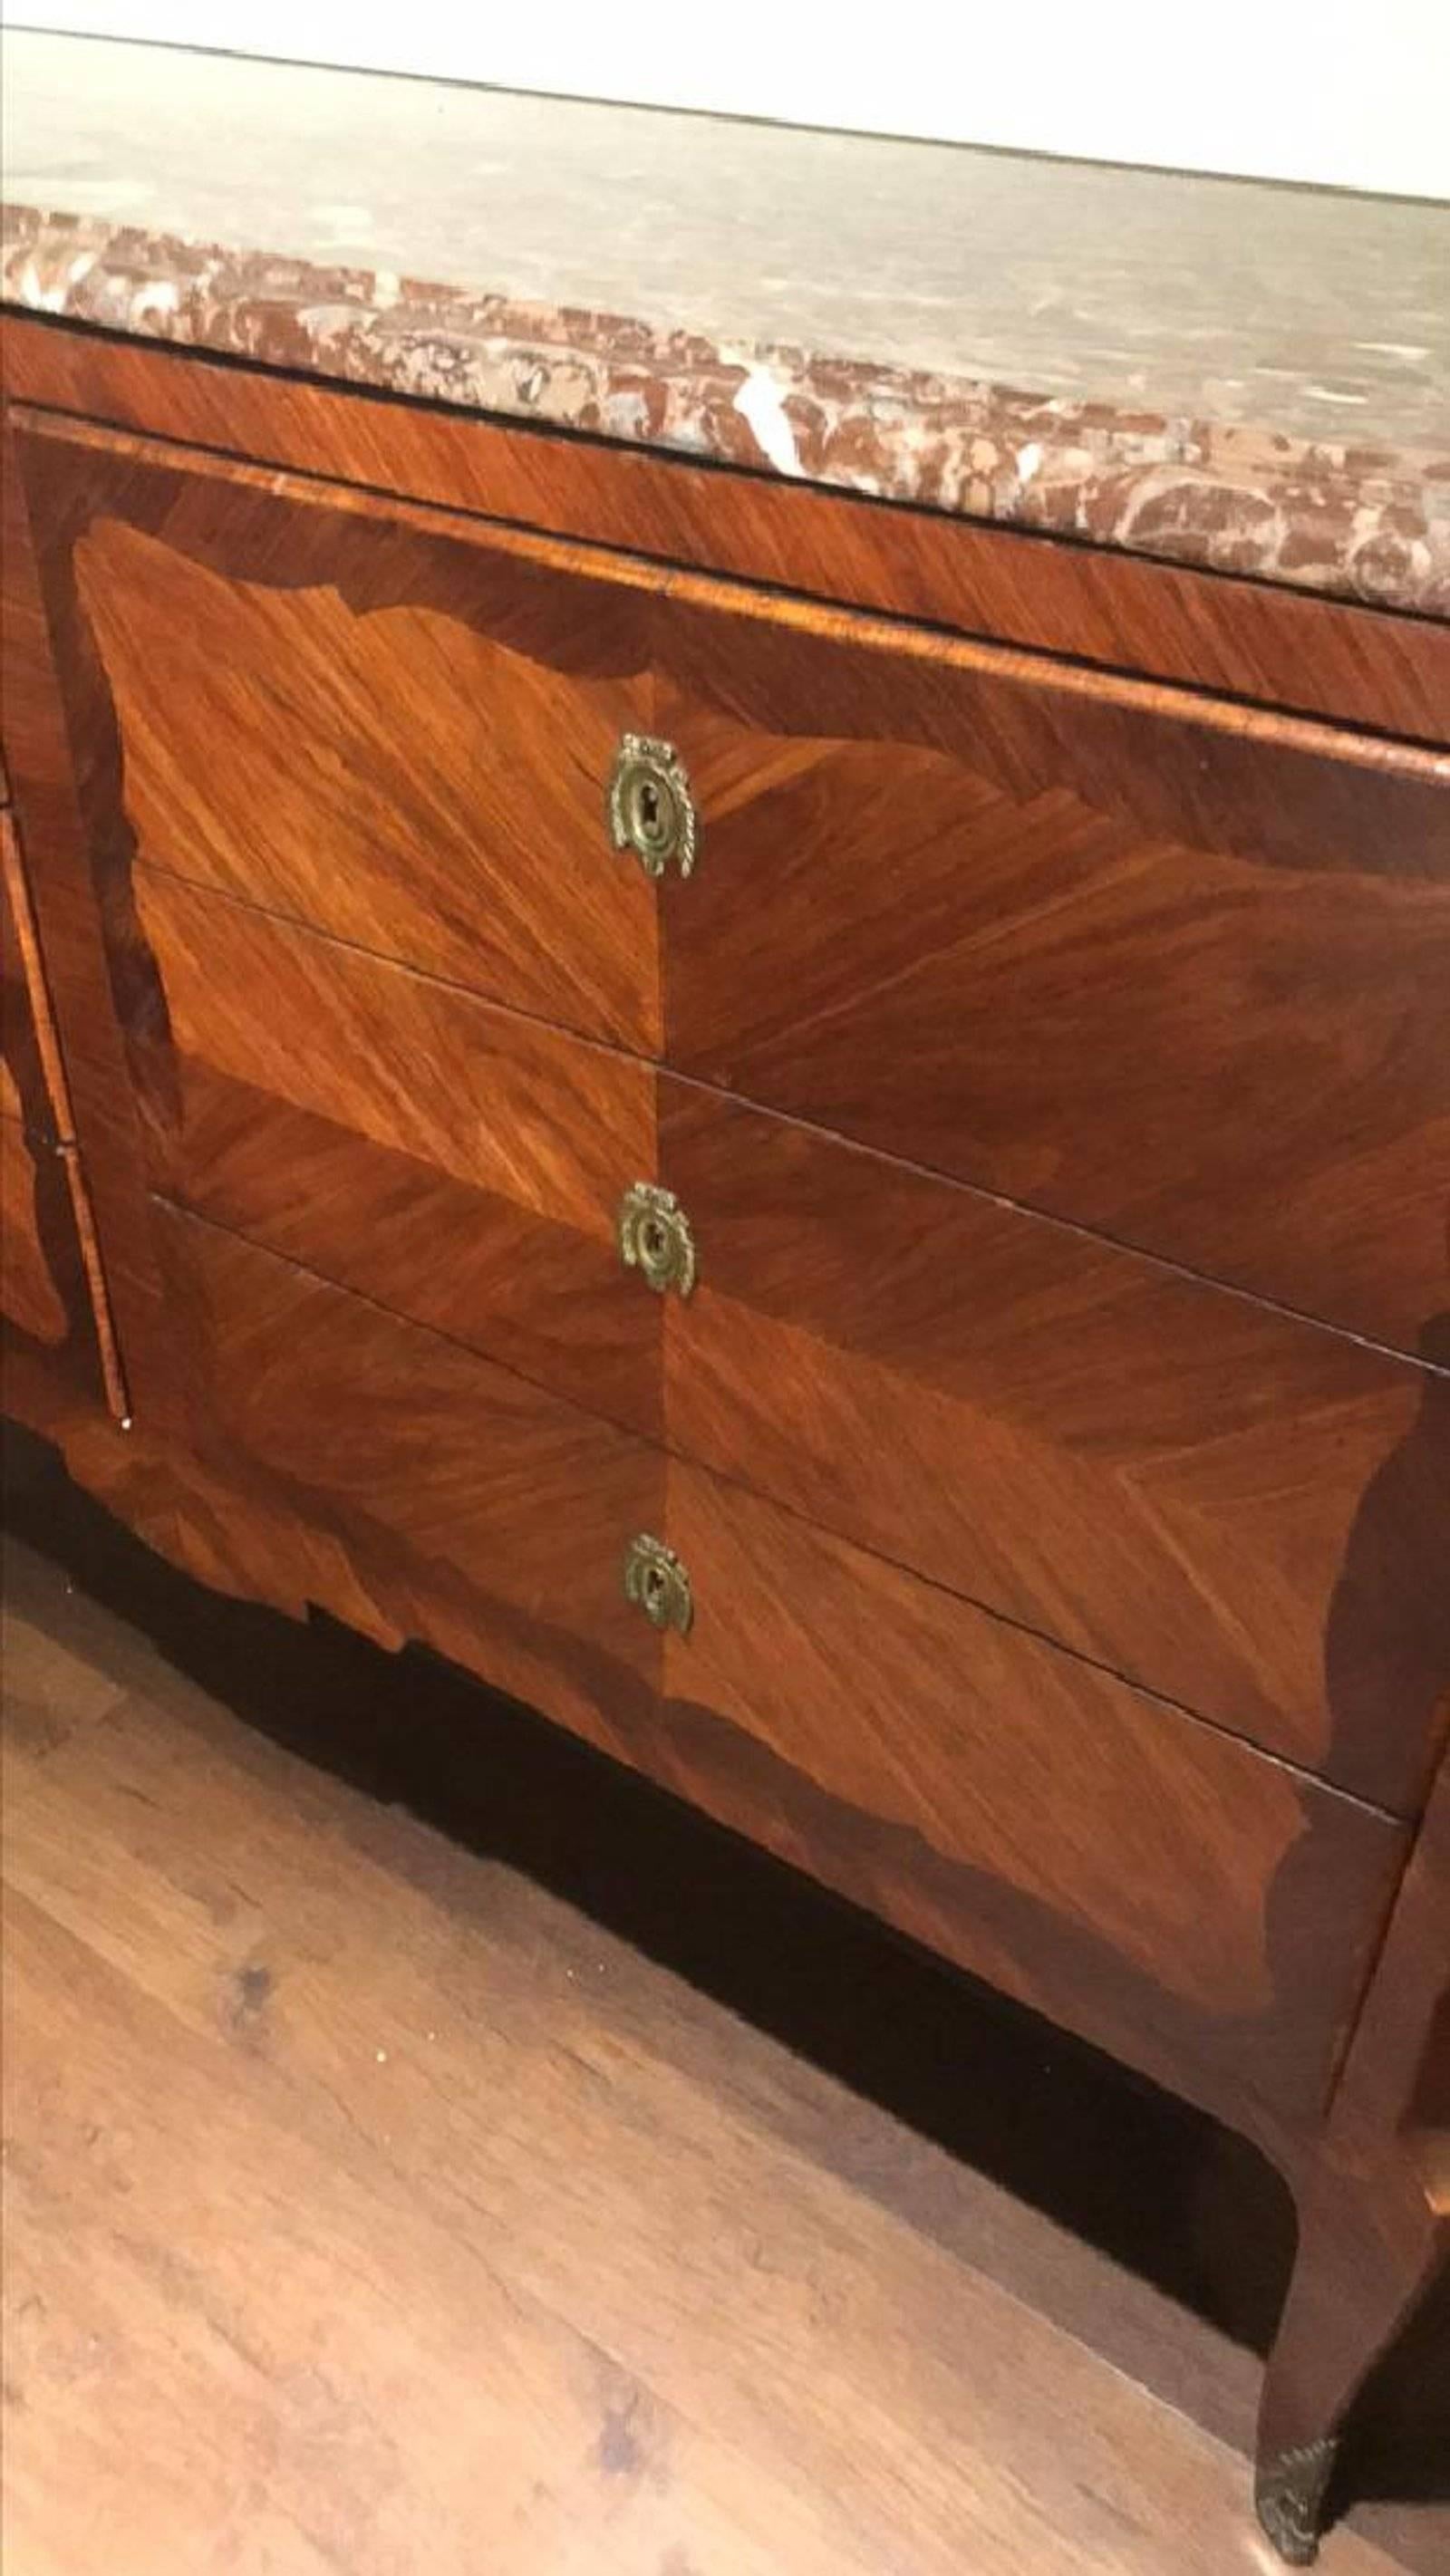 Fine quality 19th century French Louis XV design Kingswood and rosewood banded six-drawer commode with ogee edge rouge marble top, bronze ormolu escutcheons and bronze sabots.

Provenance: Harold Hand Estate, Austin, Texas,

circa 1870.